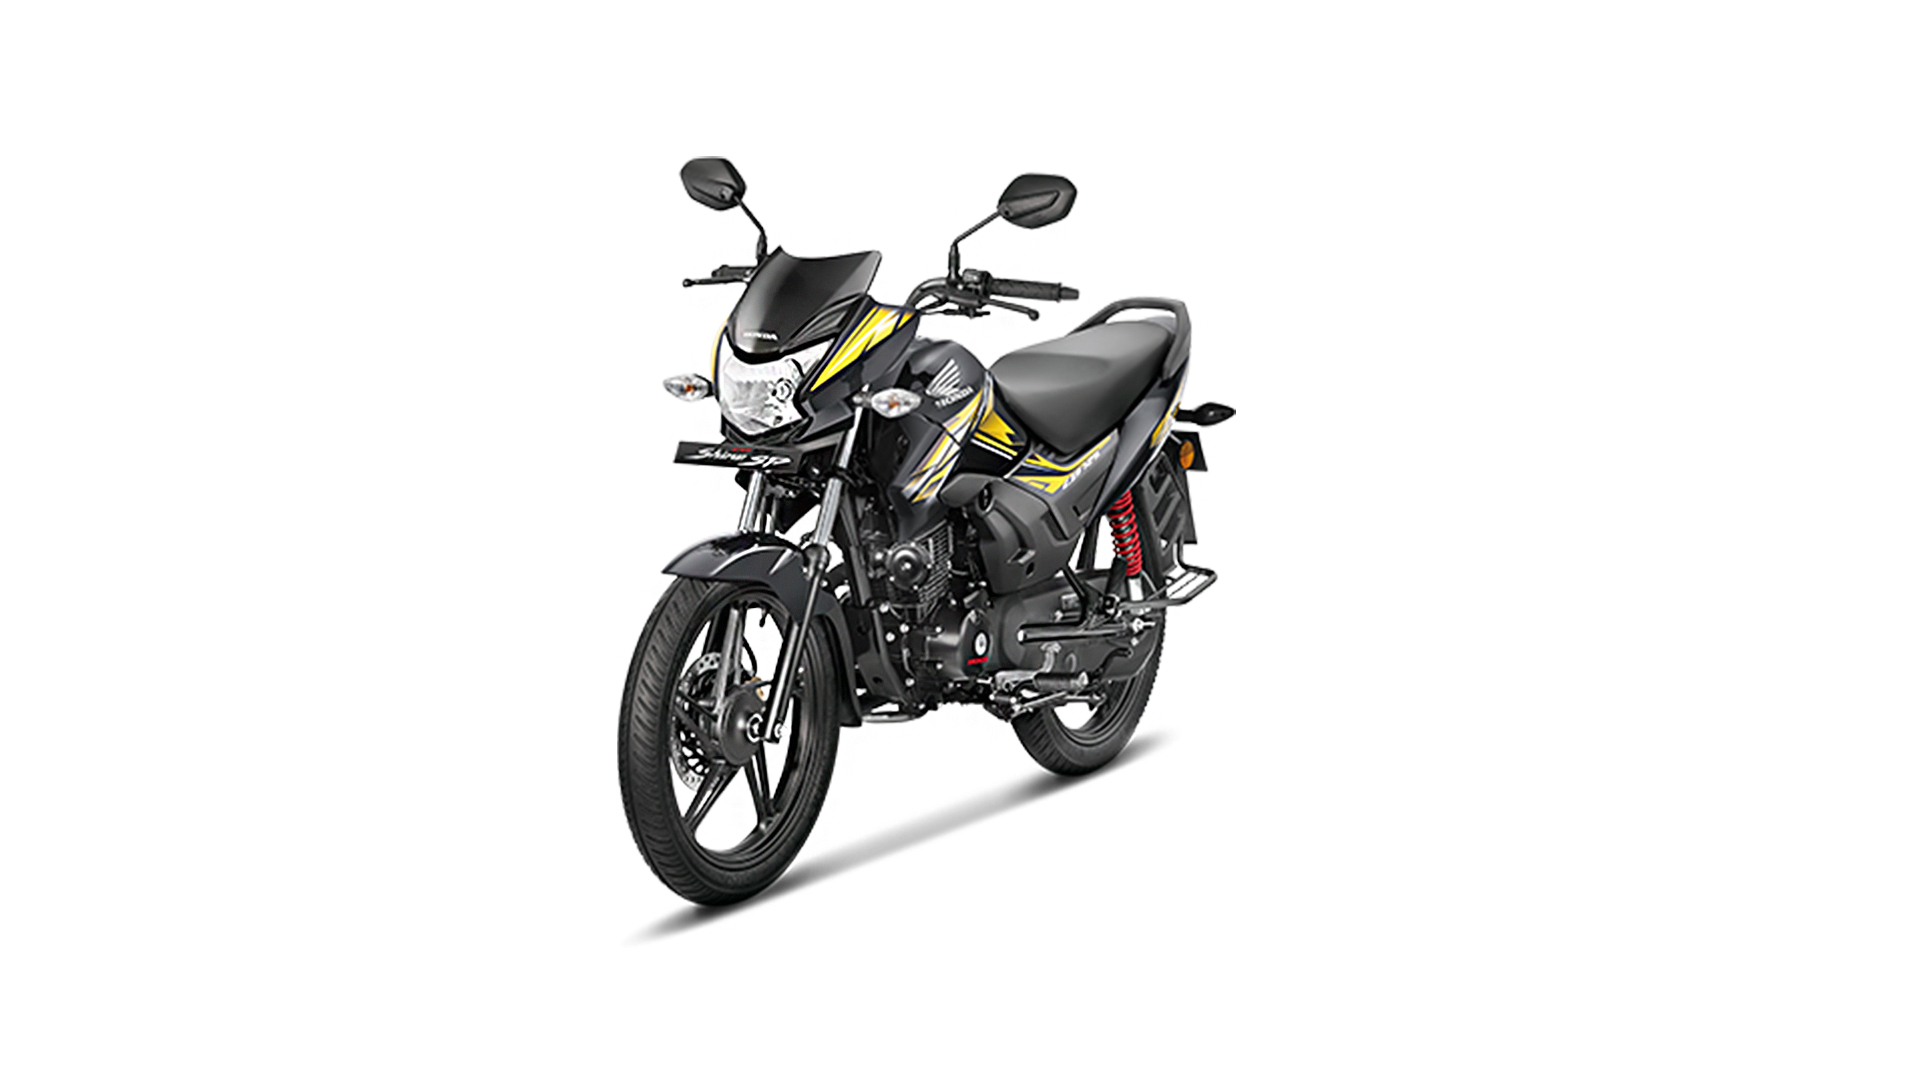 2018 Honda CB 125 Shine SP Launched In India - Price, Engine, Specs